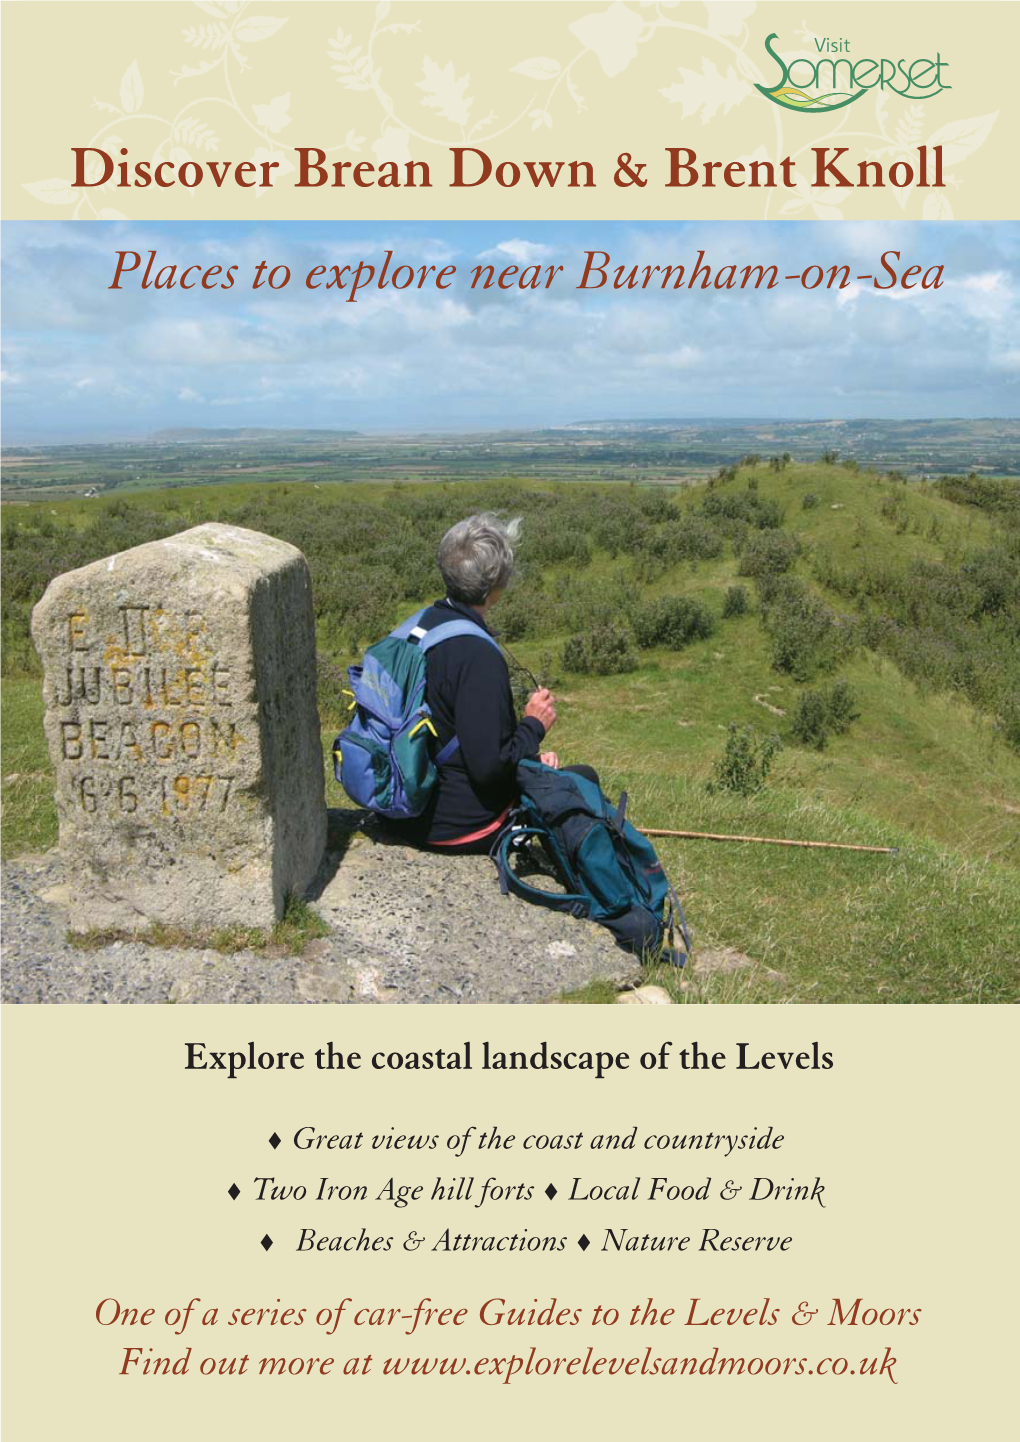 Discover Brean Down & Brent Knoll